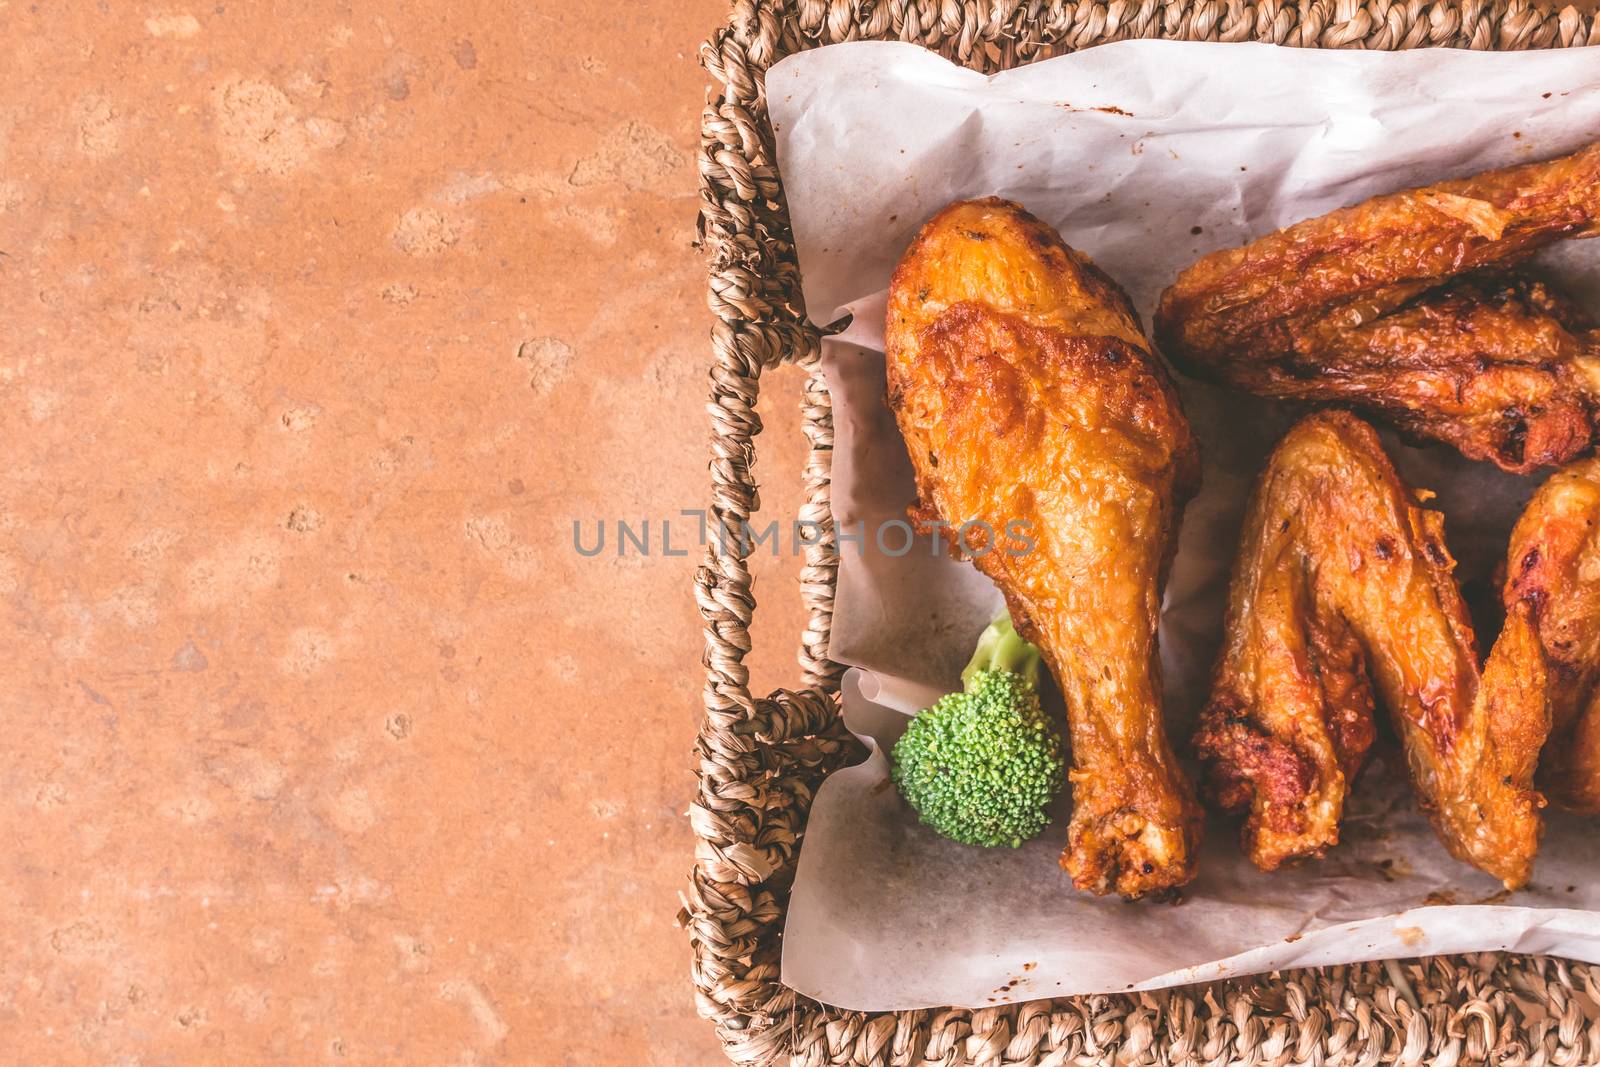 Top view of Fried chicken legs and wings in basket. Free space for text